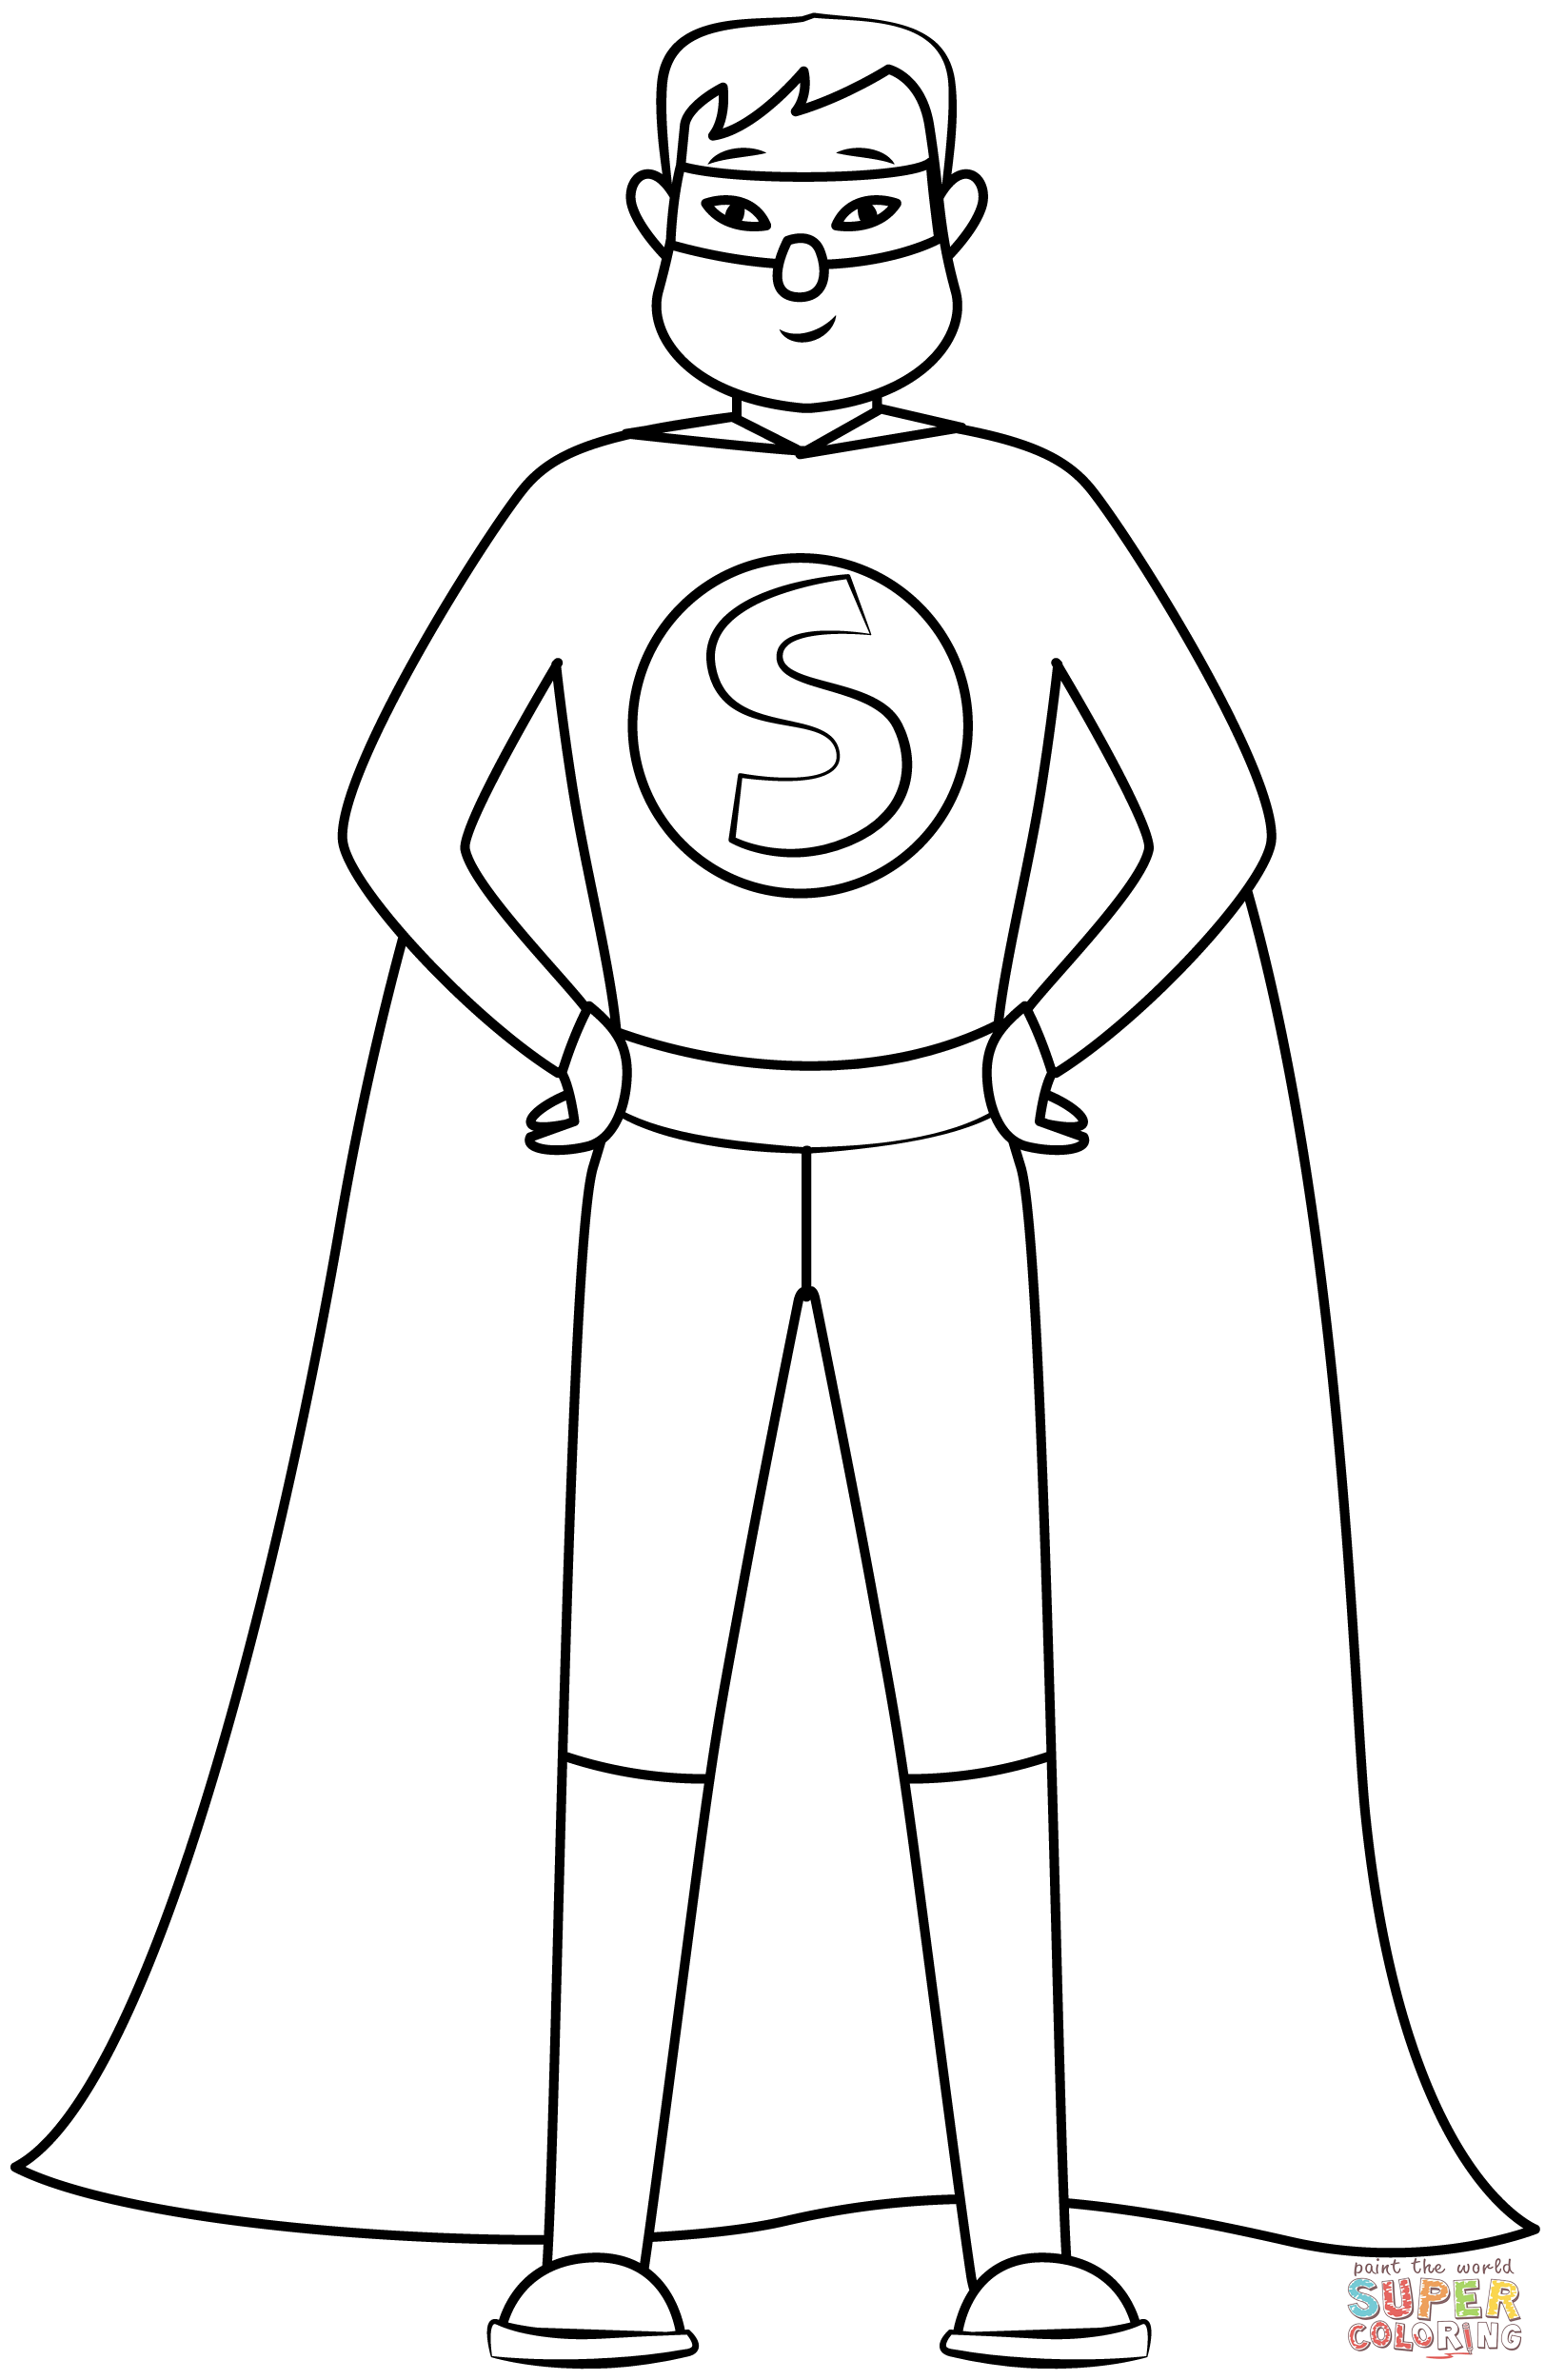 Superhero coloring page free printable coloring pages